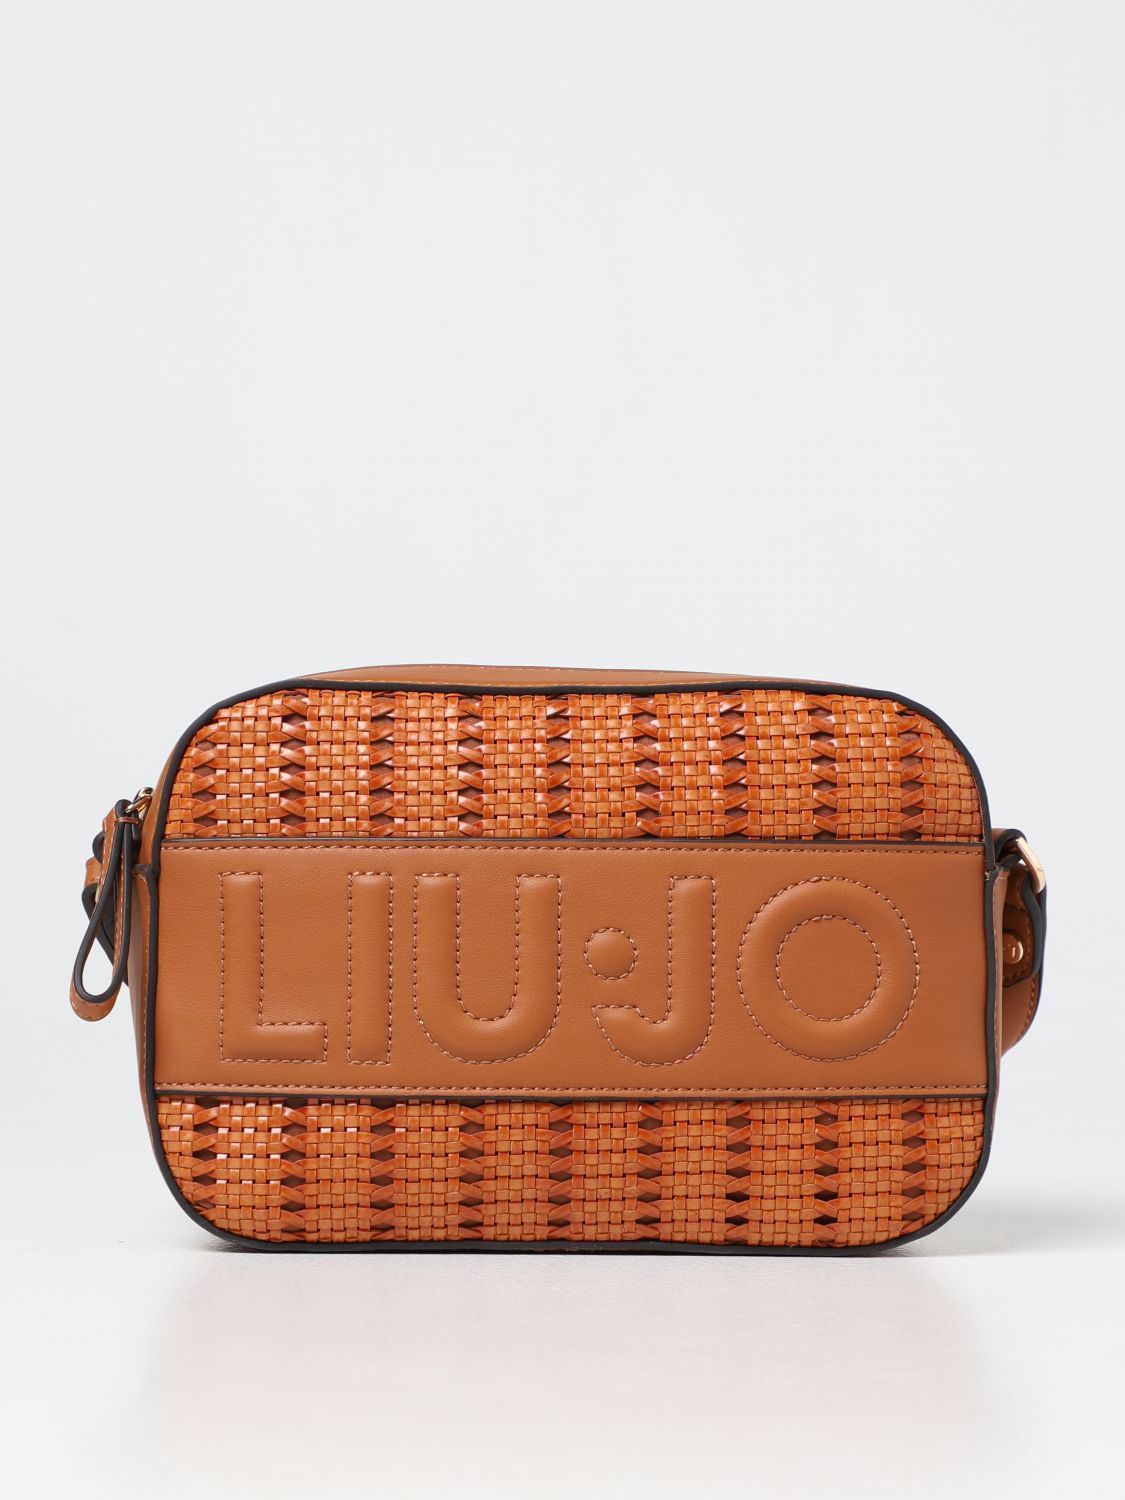 Liu •jo Camera Bag In Synthetic Leather In Camel